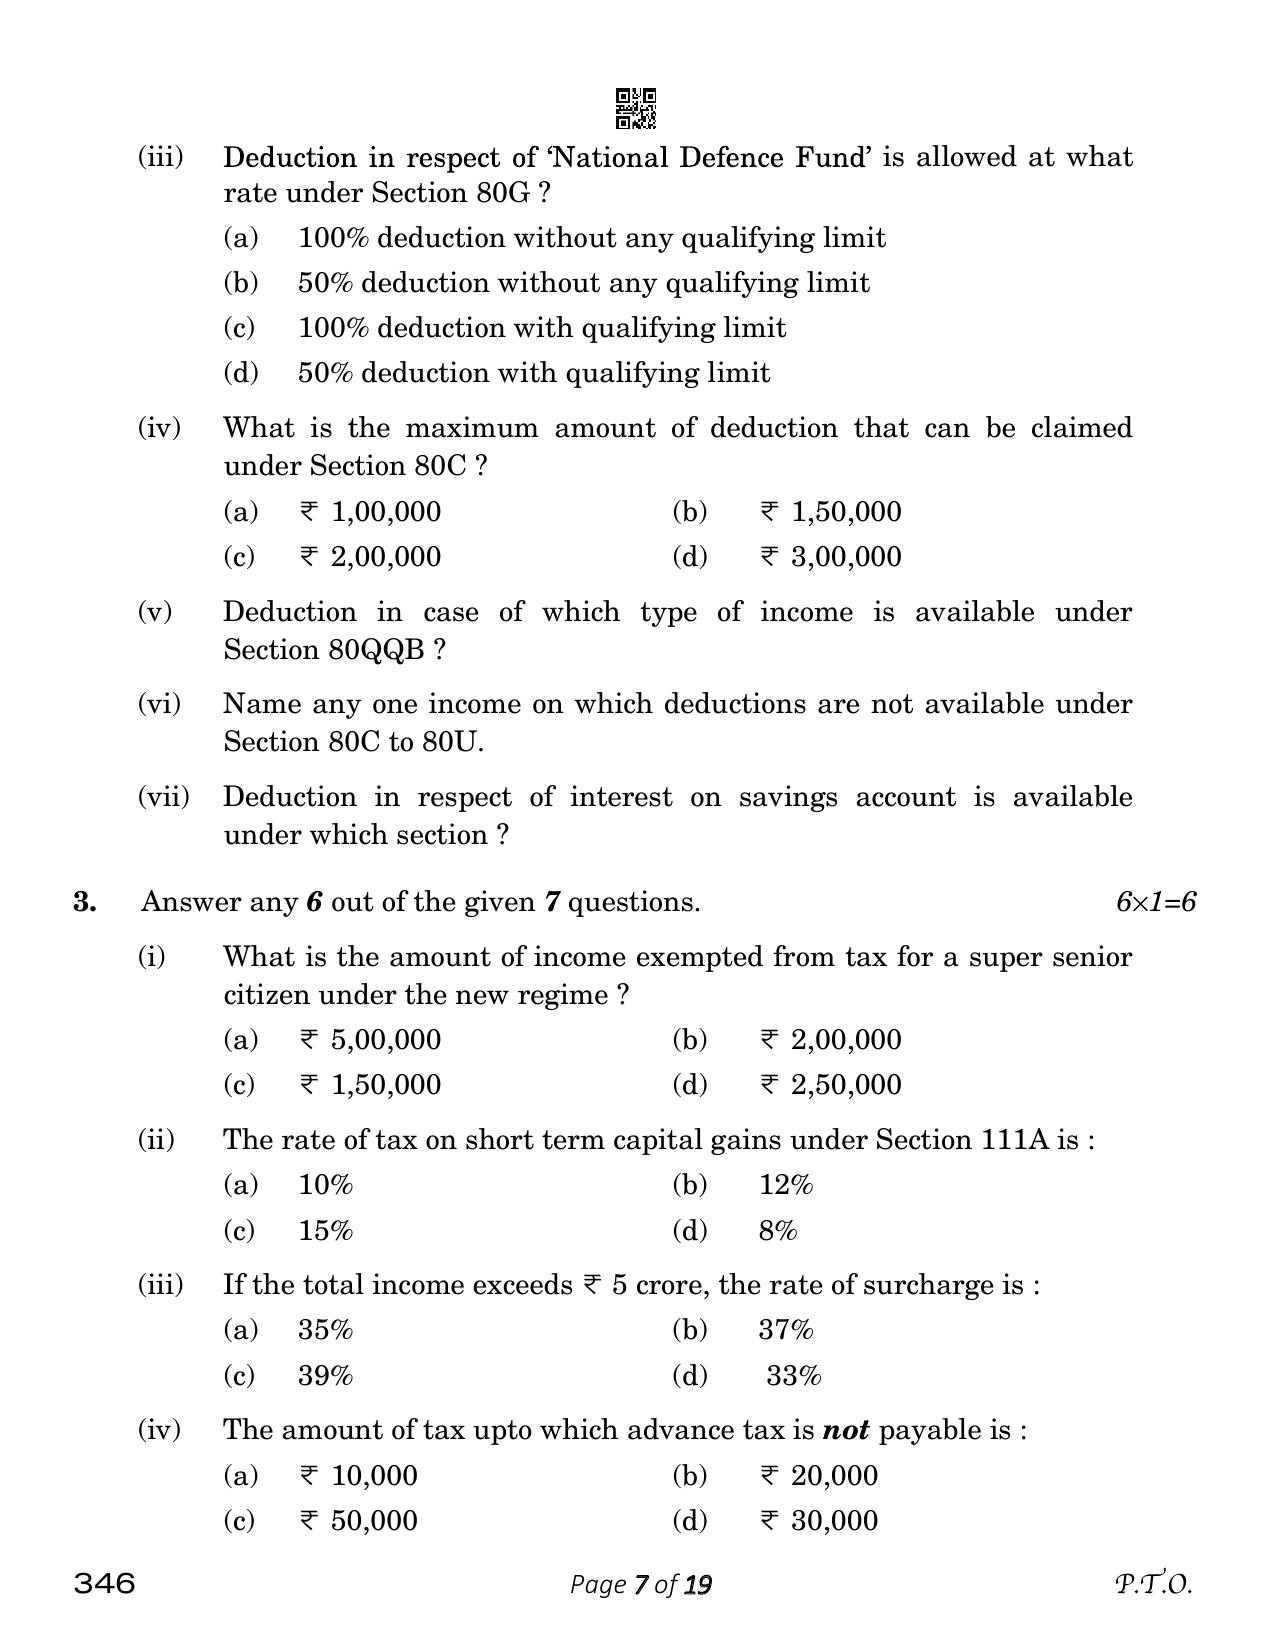 CBSE Class 12 Taxation (Compartment) 2023 Question Paper - Page 7